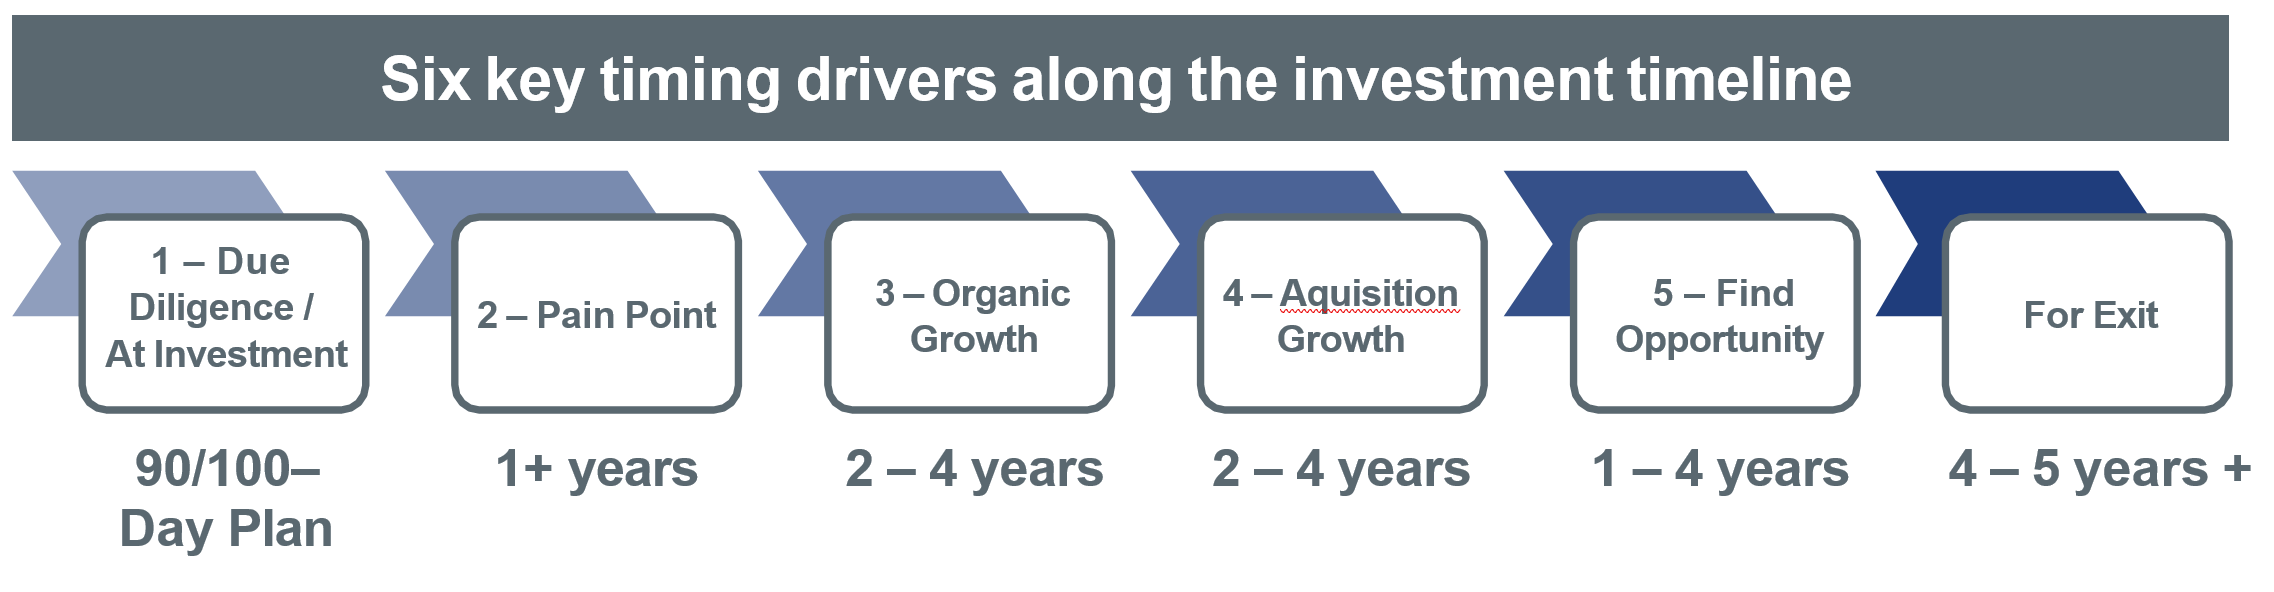 Six key timing drivers along the investment timeline